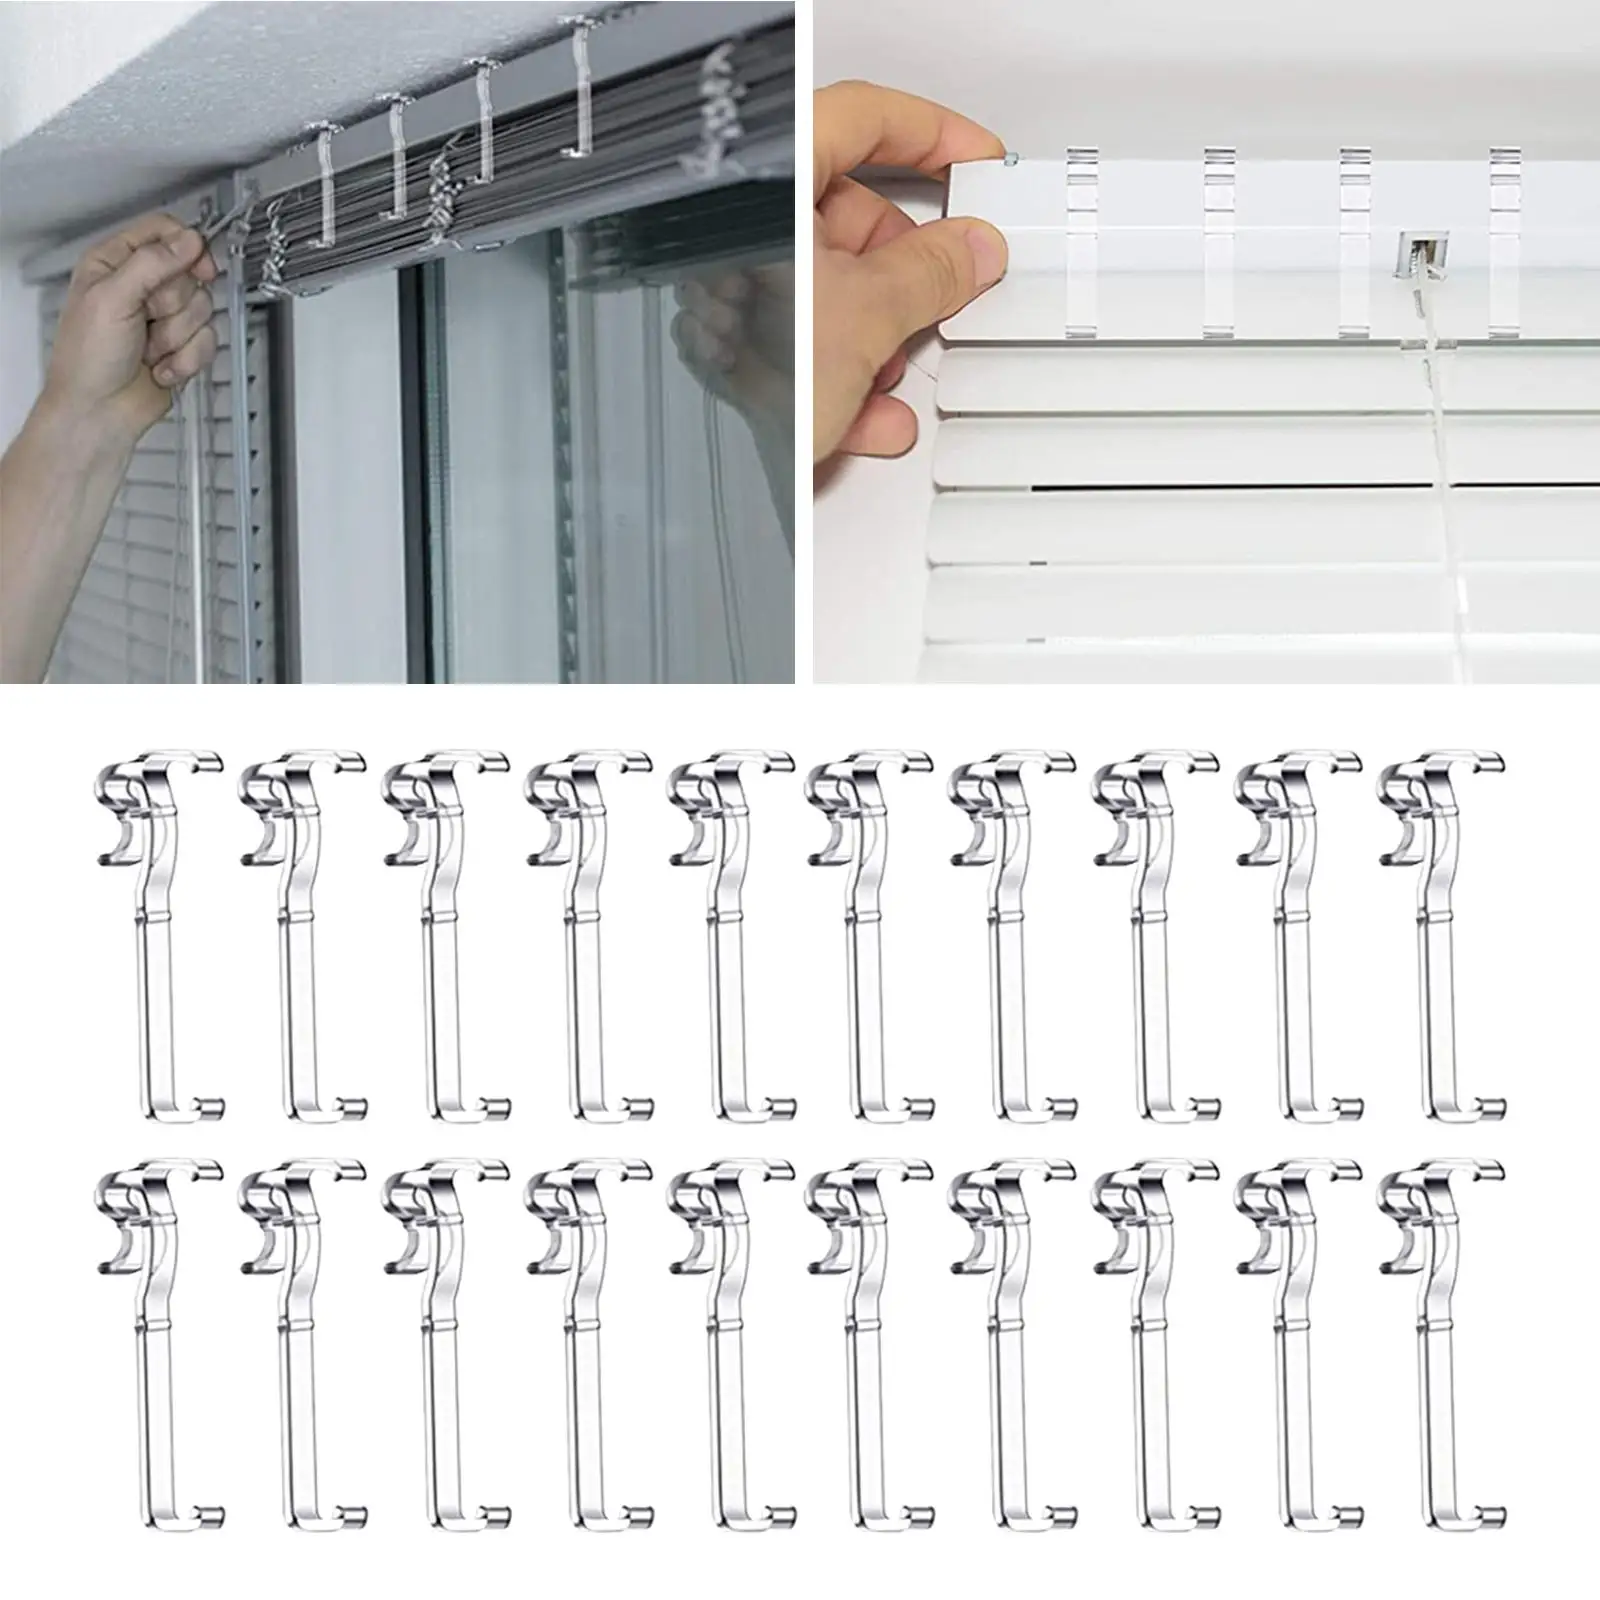 20 x Blind Clips Replacements Holder Invisible Valance Clips Valance Clips for Horizontal Blind for Vertical Blinds Accessories